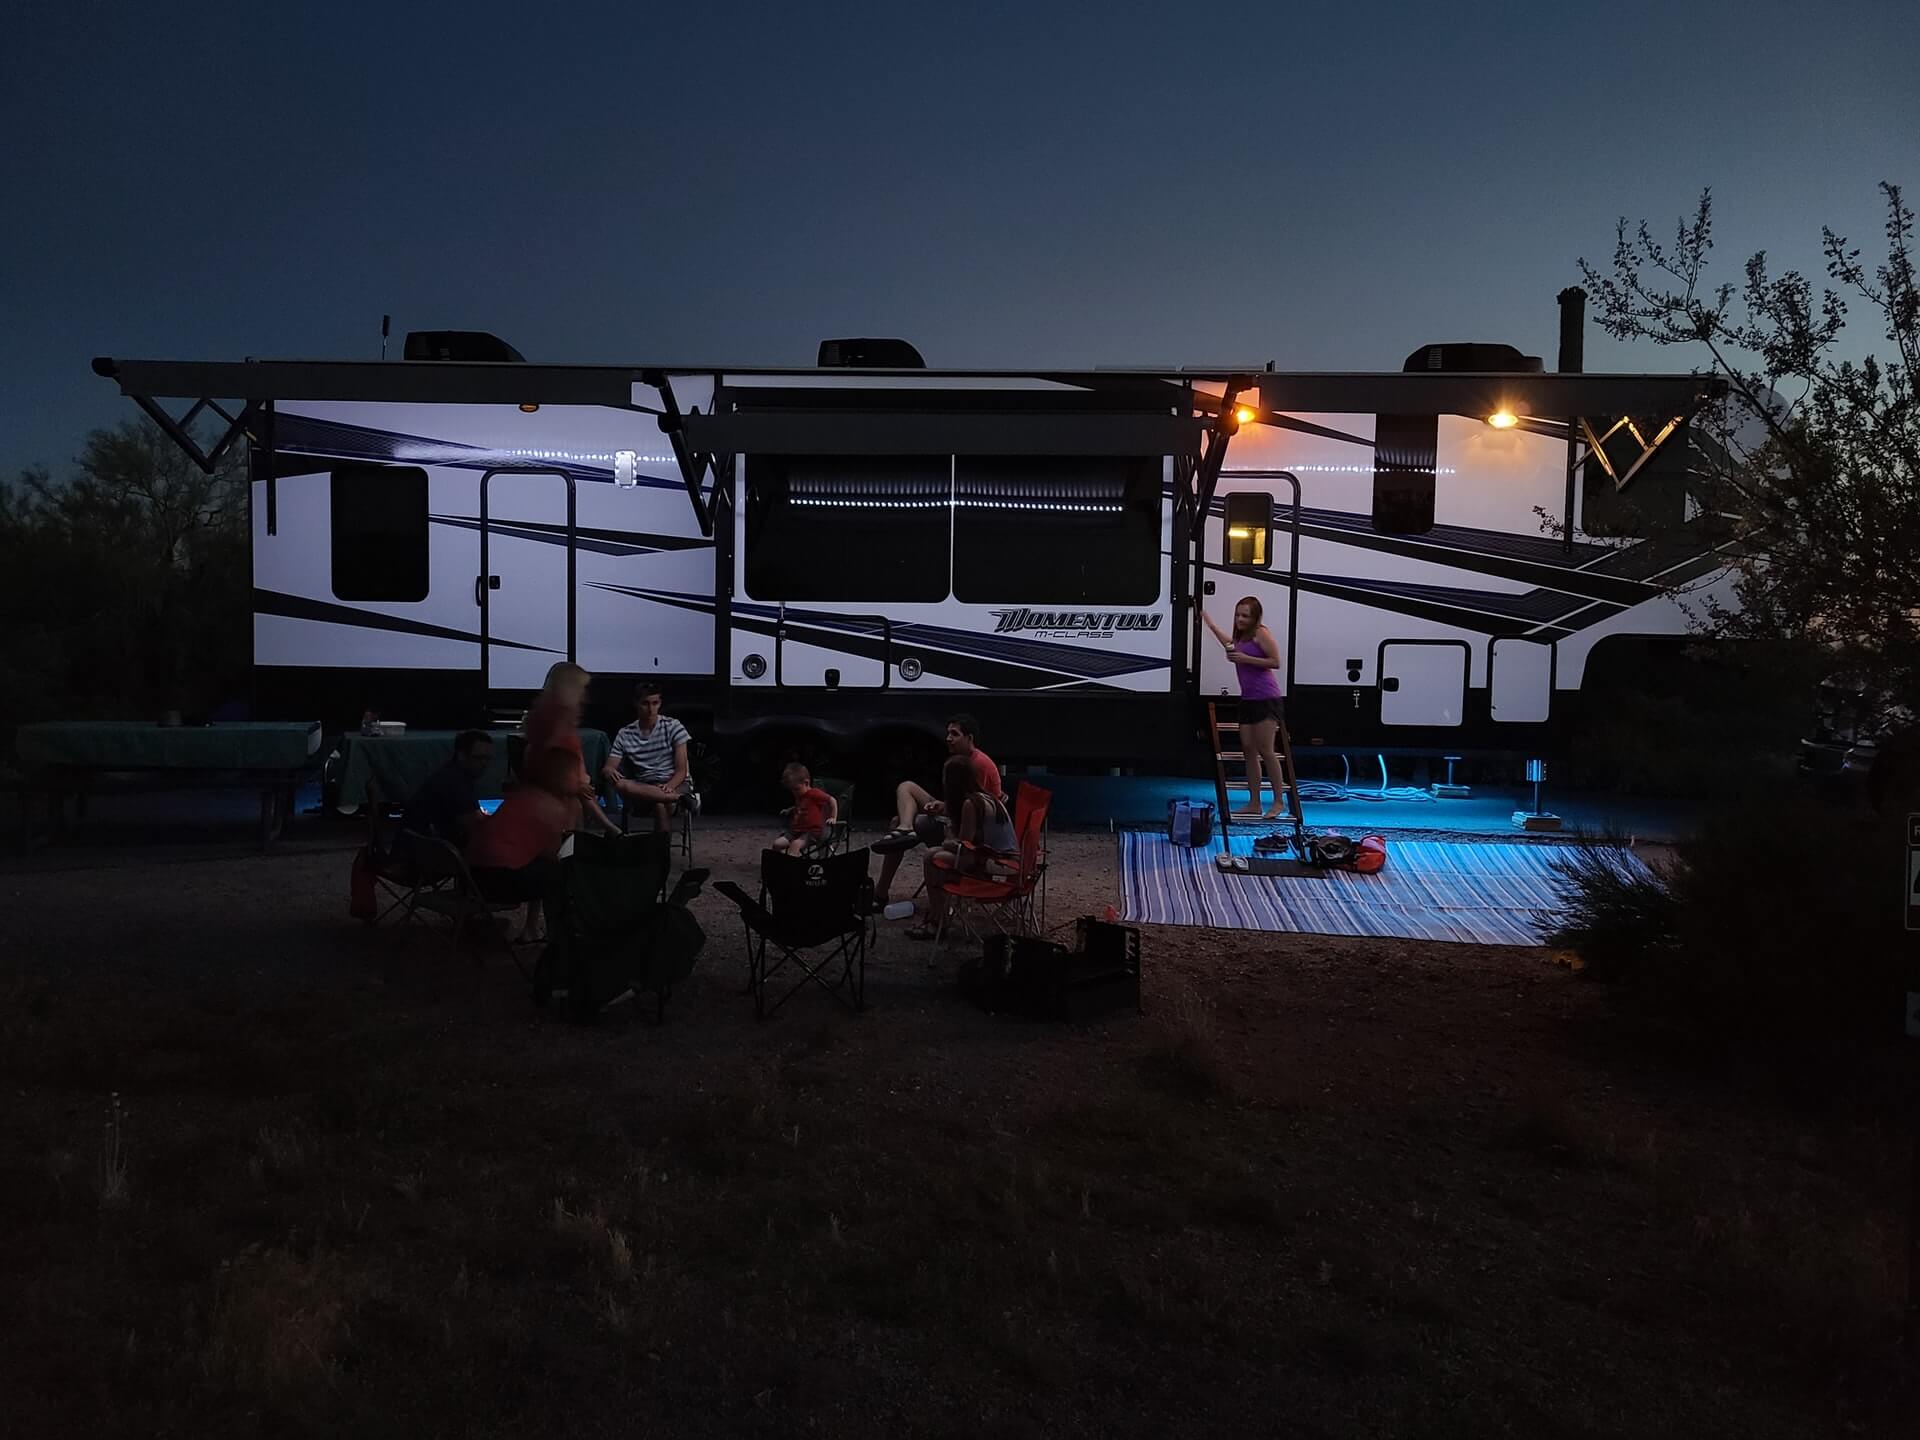 Family-friendly RV park includes enjoying summer evening with kids